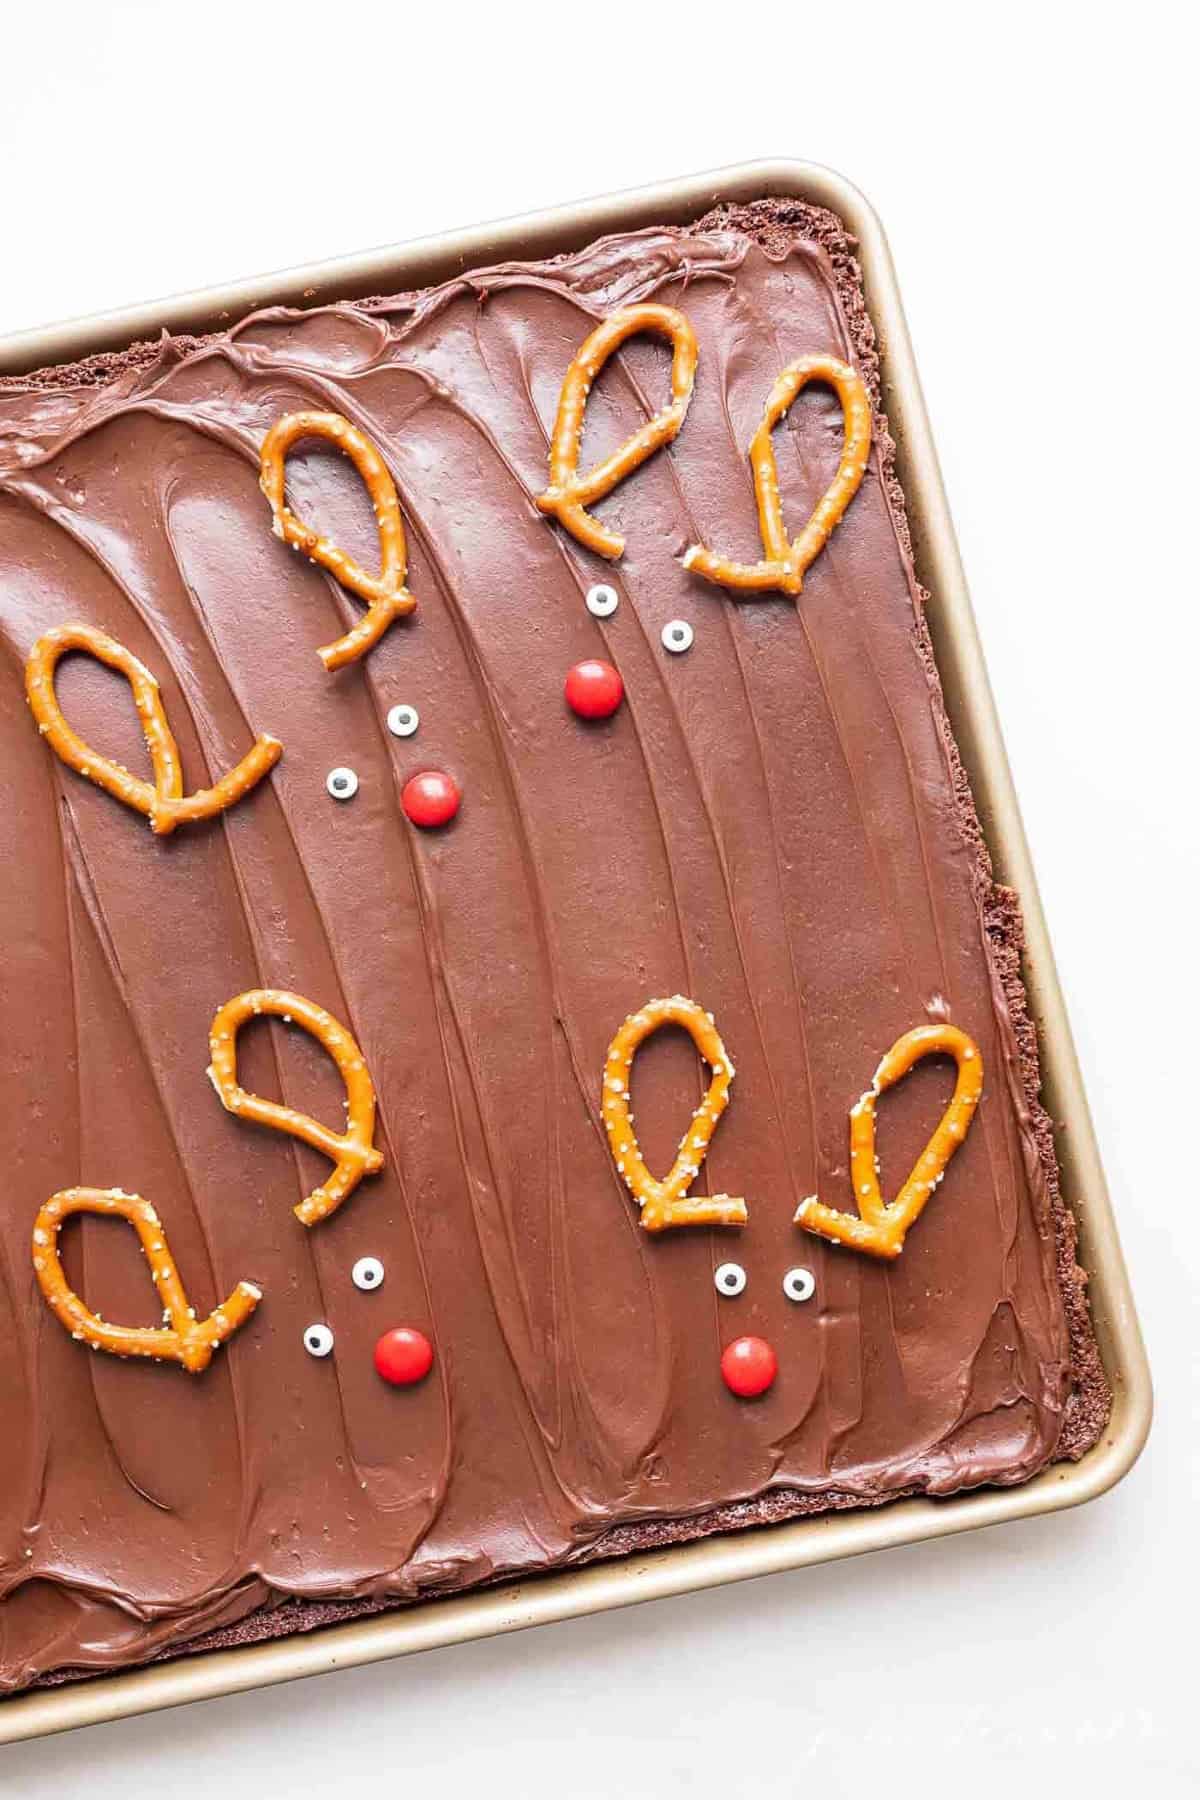 A pan of Christmas brownies decorated with reindeer pretzel antlers.